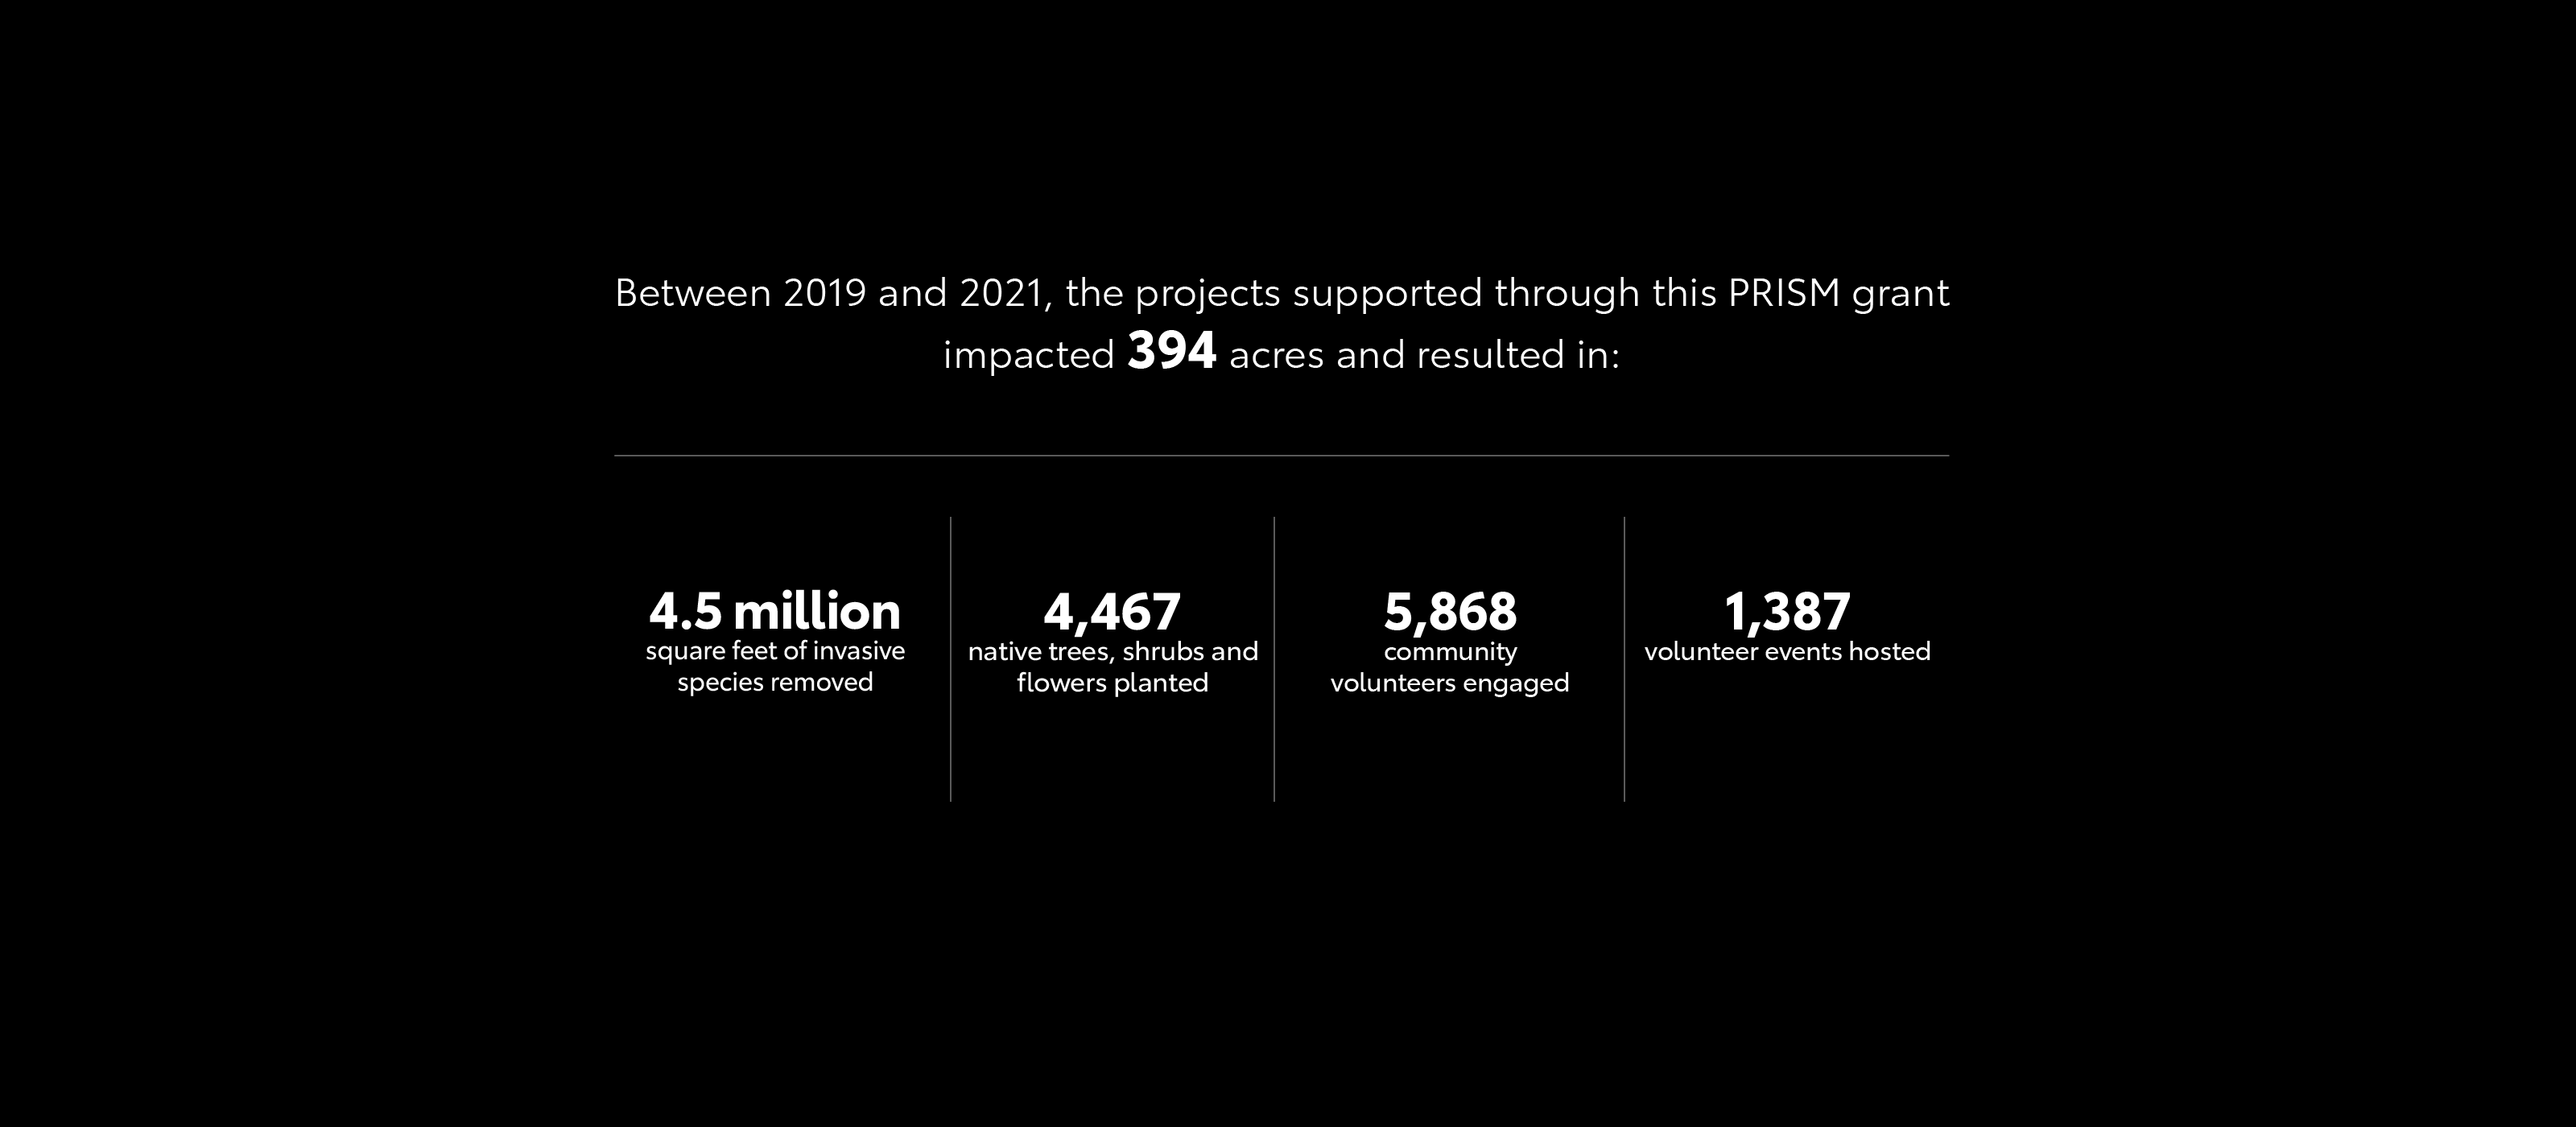 Between 2019 and 2021, the projects supported through this PRISM grant impacted 394 acres and resulted in: 4.5 million sqaure feet of invasive species removed, 4,467 native trees, shrubs and flowers planted, 5,868 community volenteers engaged, and 1,387 volunteer events hosted